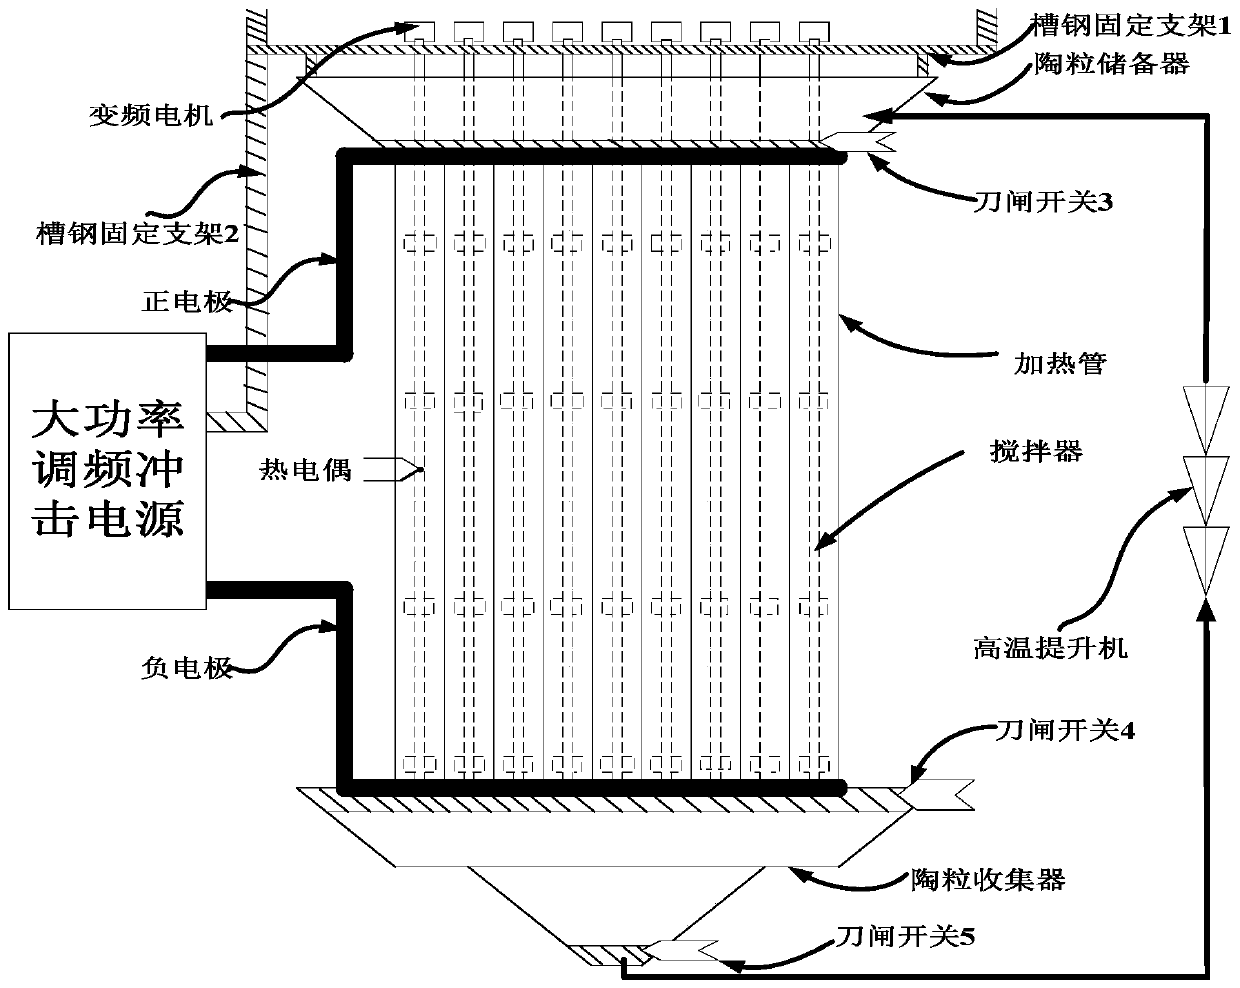 High-temperature solid ceramsite sand electric heating experiment device for supercritical carbon dioxide power generation